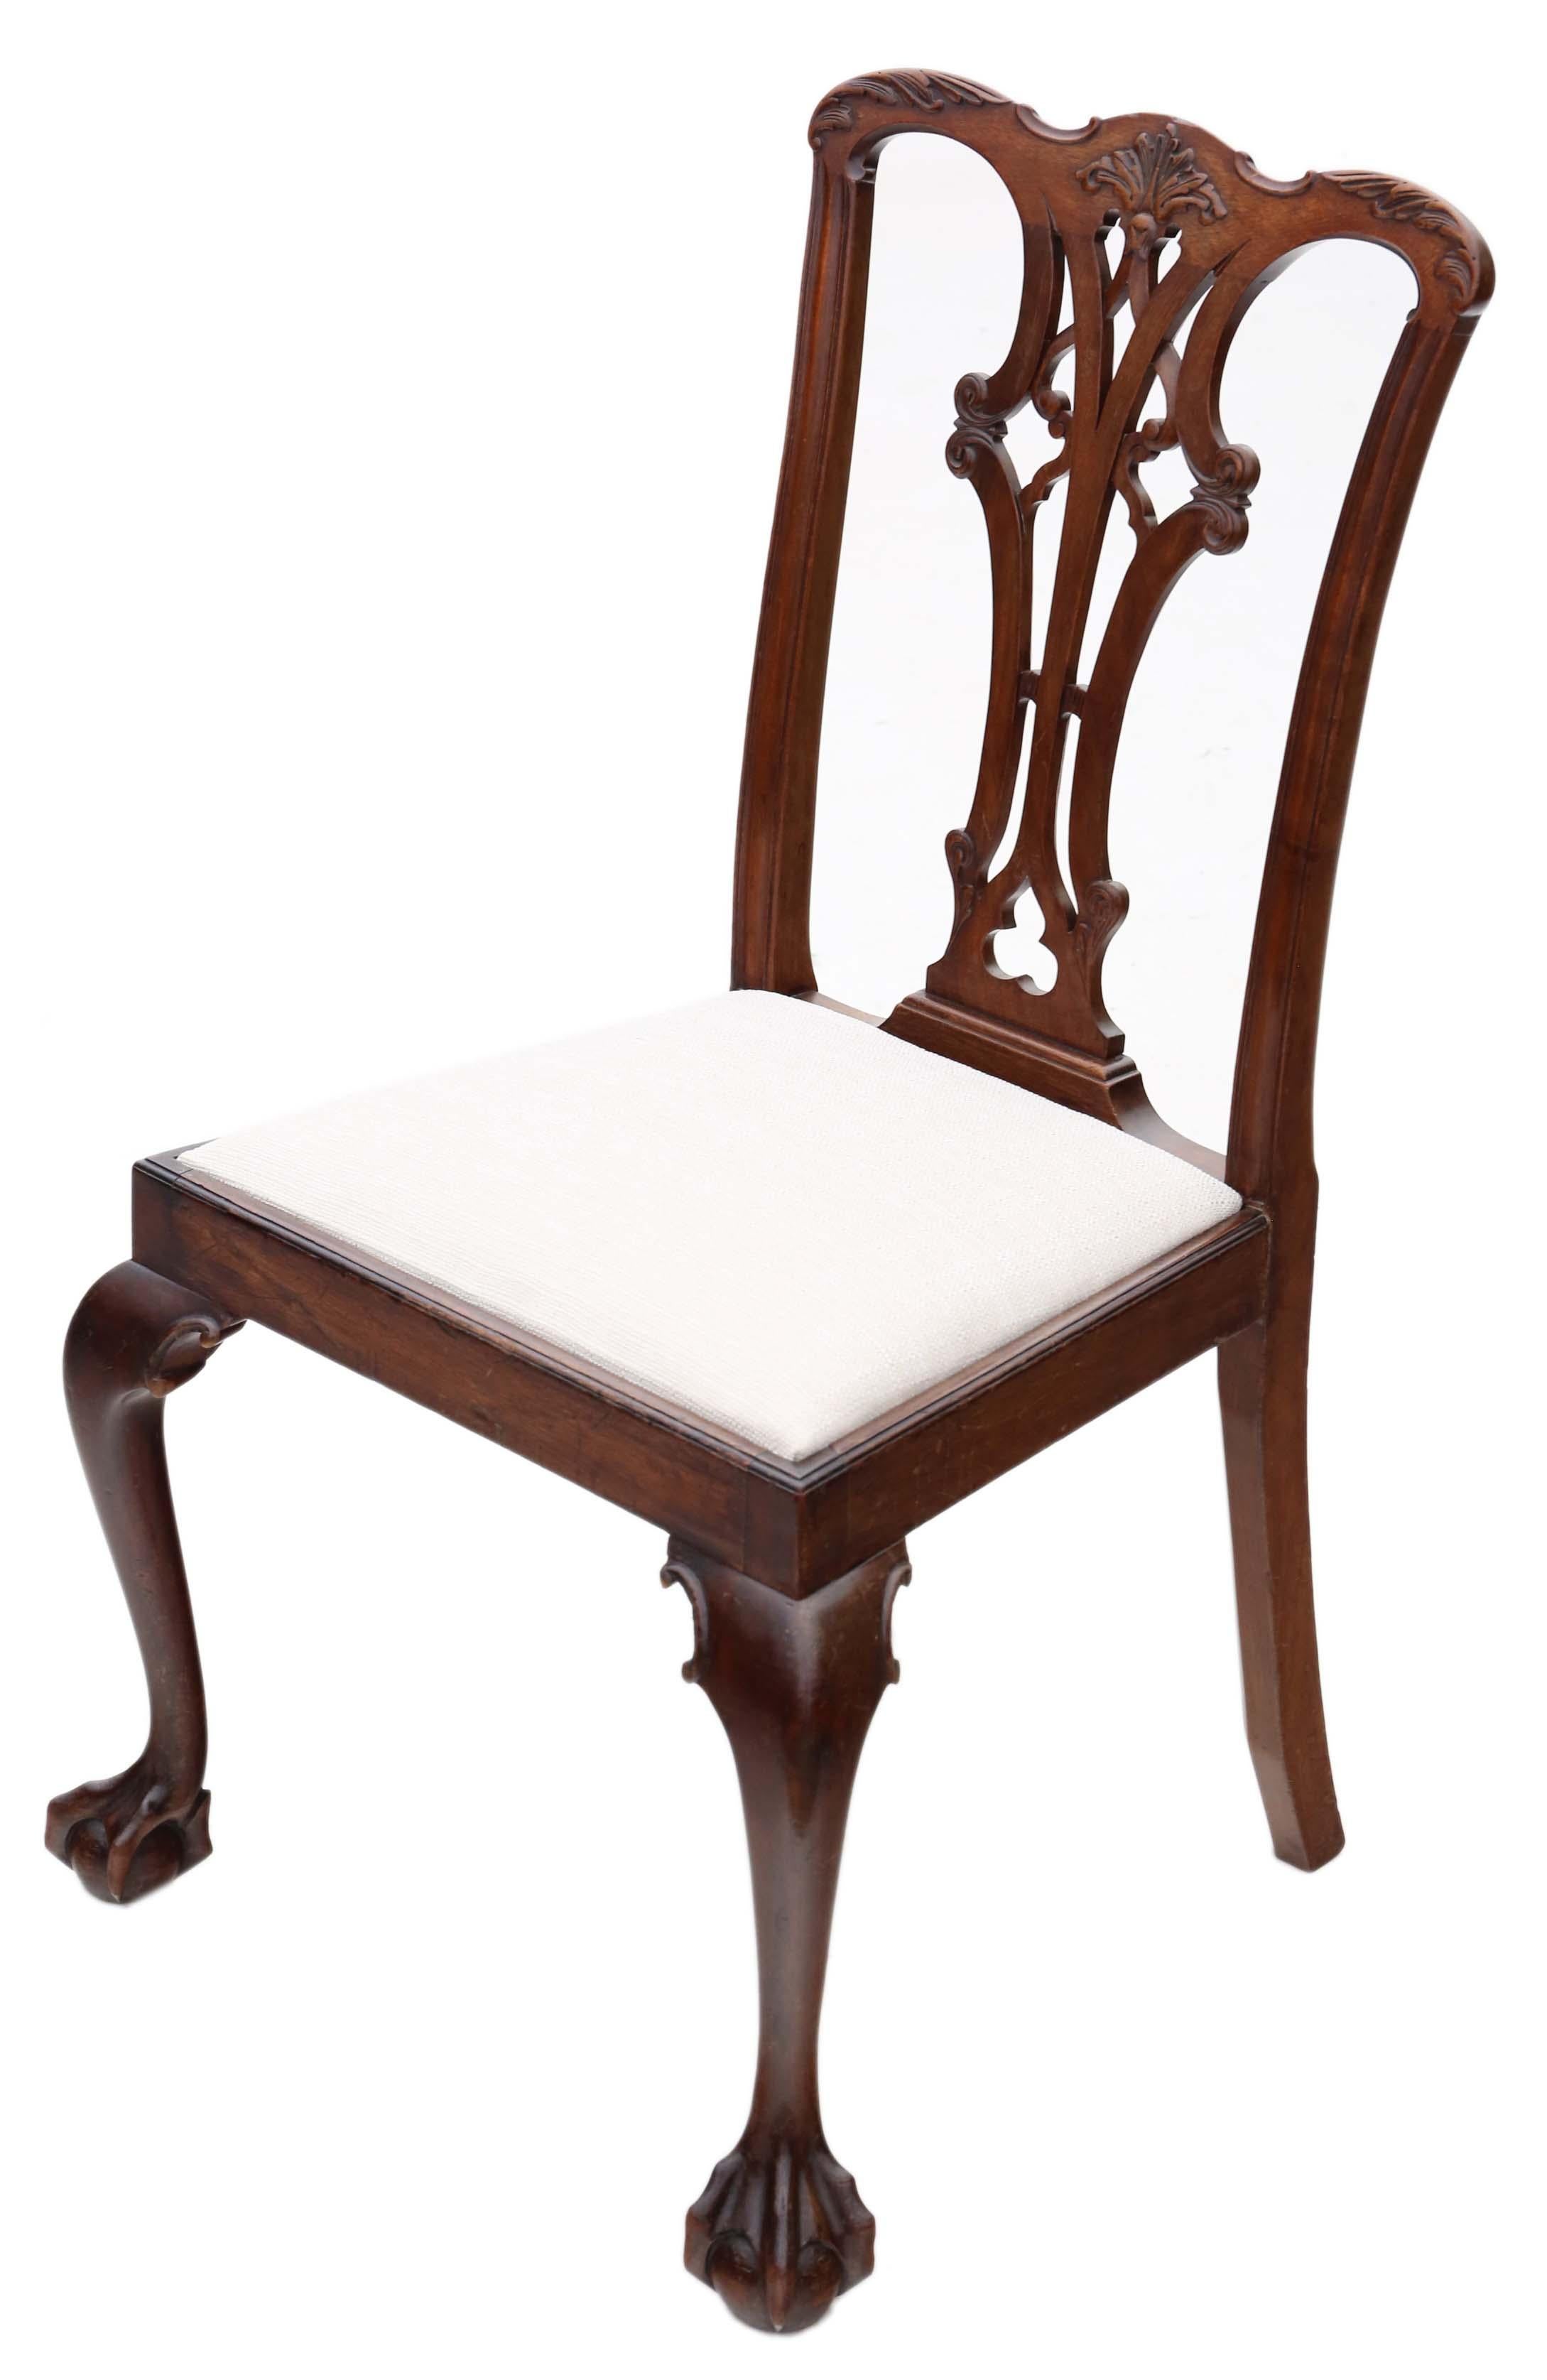 Georgian Revival Mahogany Dining Chairs: Set of 8 (6+2), Antique Quality, C1910 For Sale 1